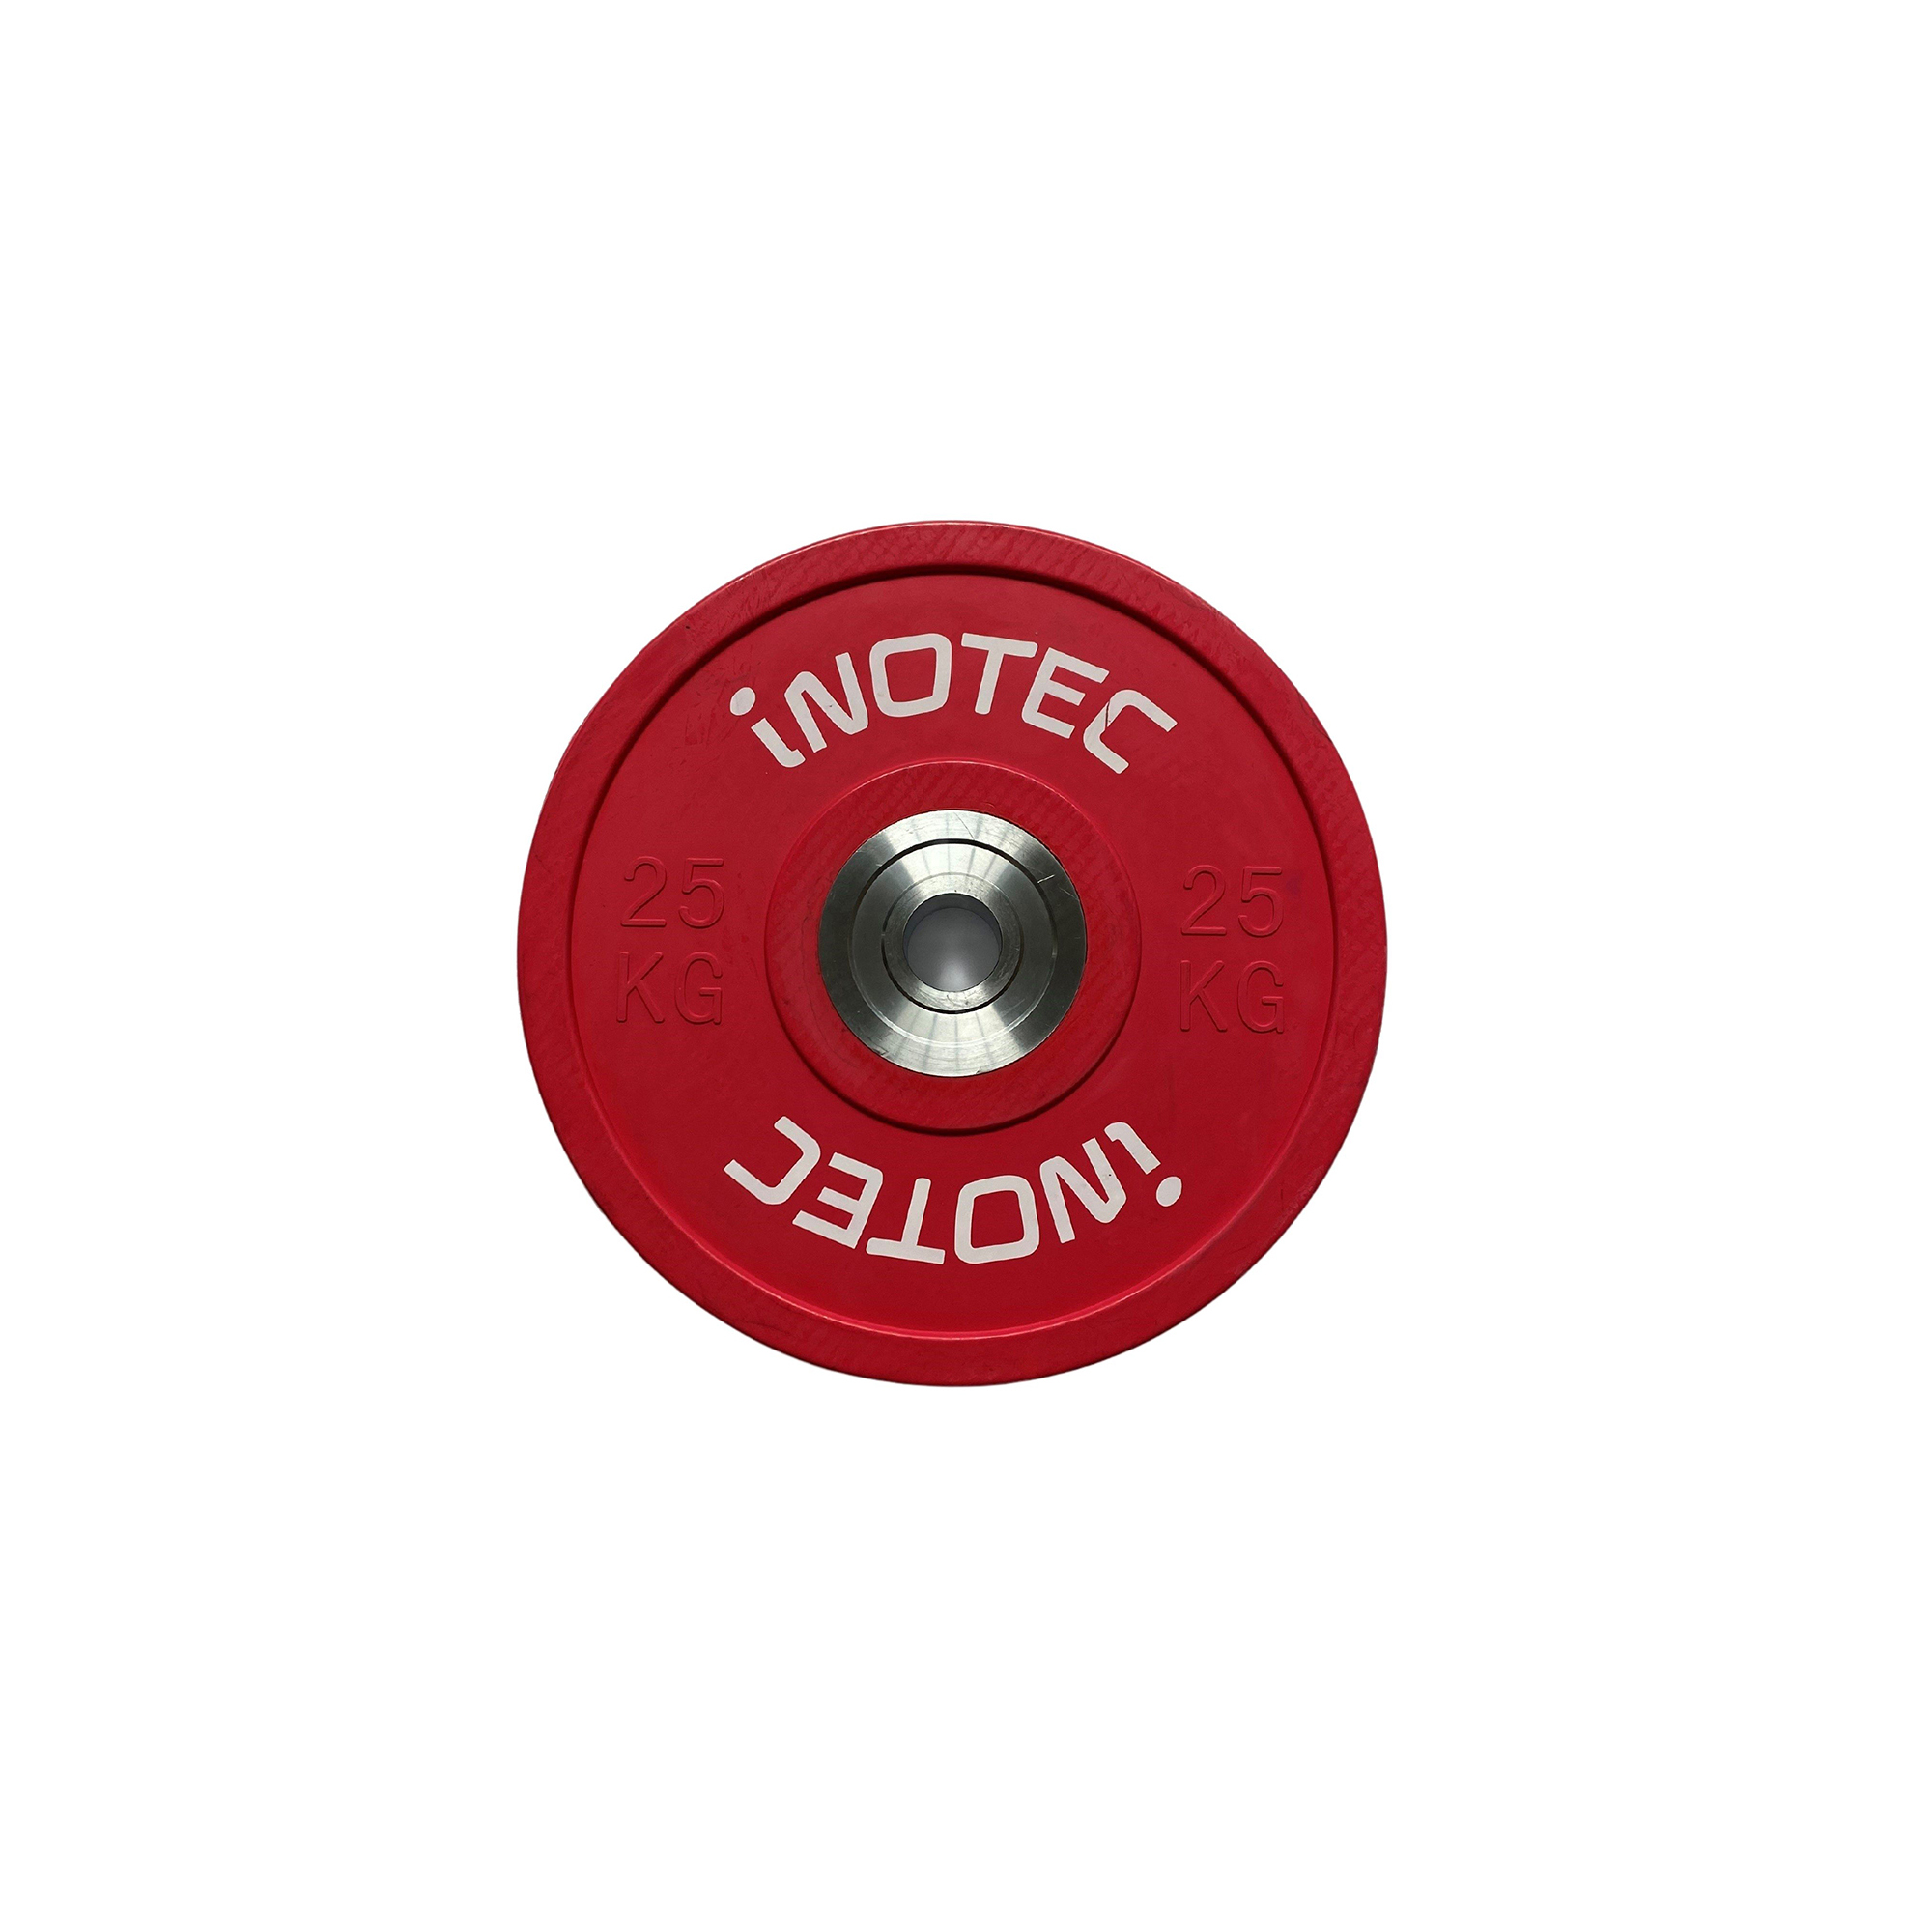 Inotec Competition Bumper Plate 25 kg (Stk) - Old